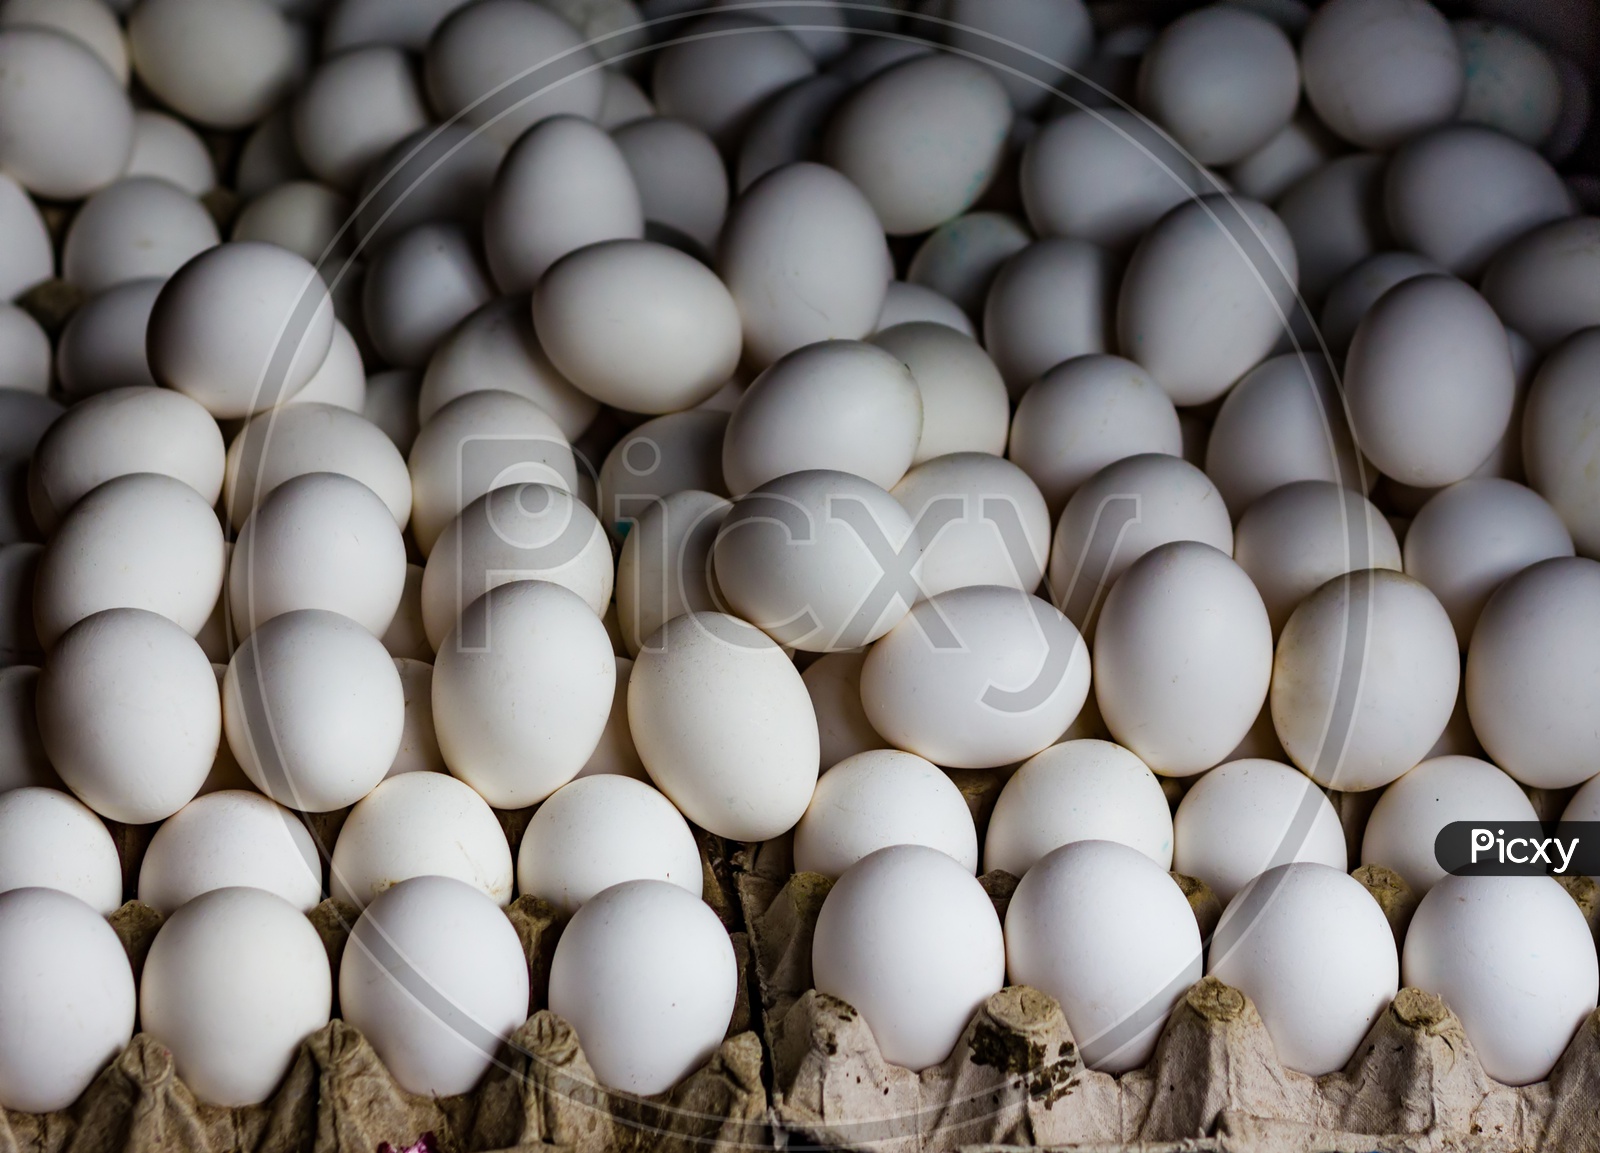 Stack Heap Of Eggs White For Sale In Poultry Farm Supermarket For Sale.